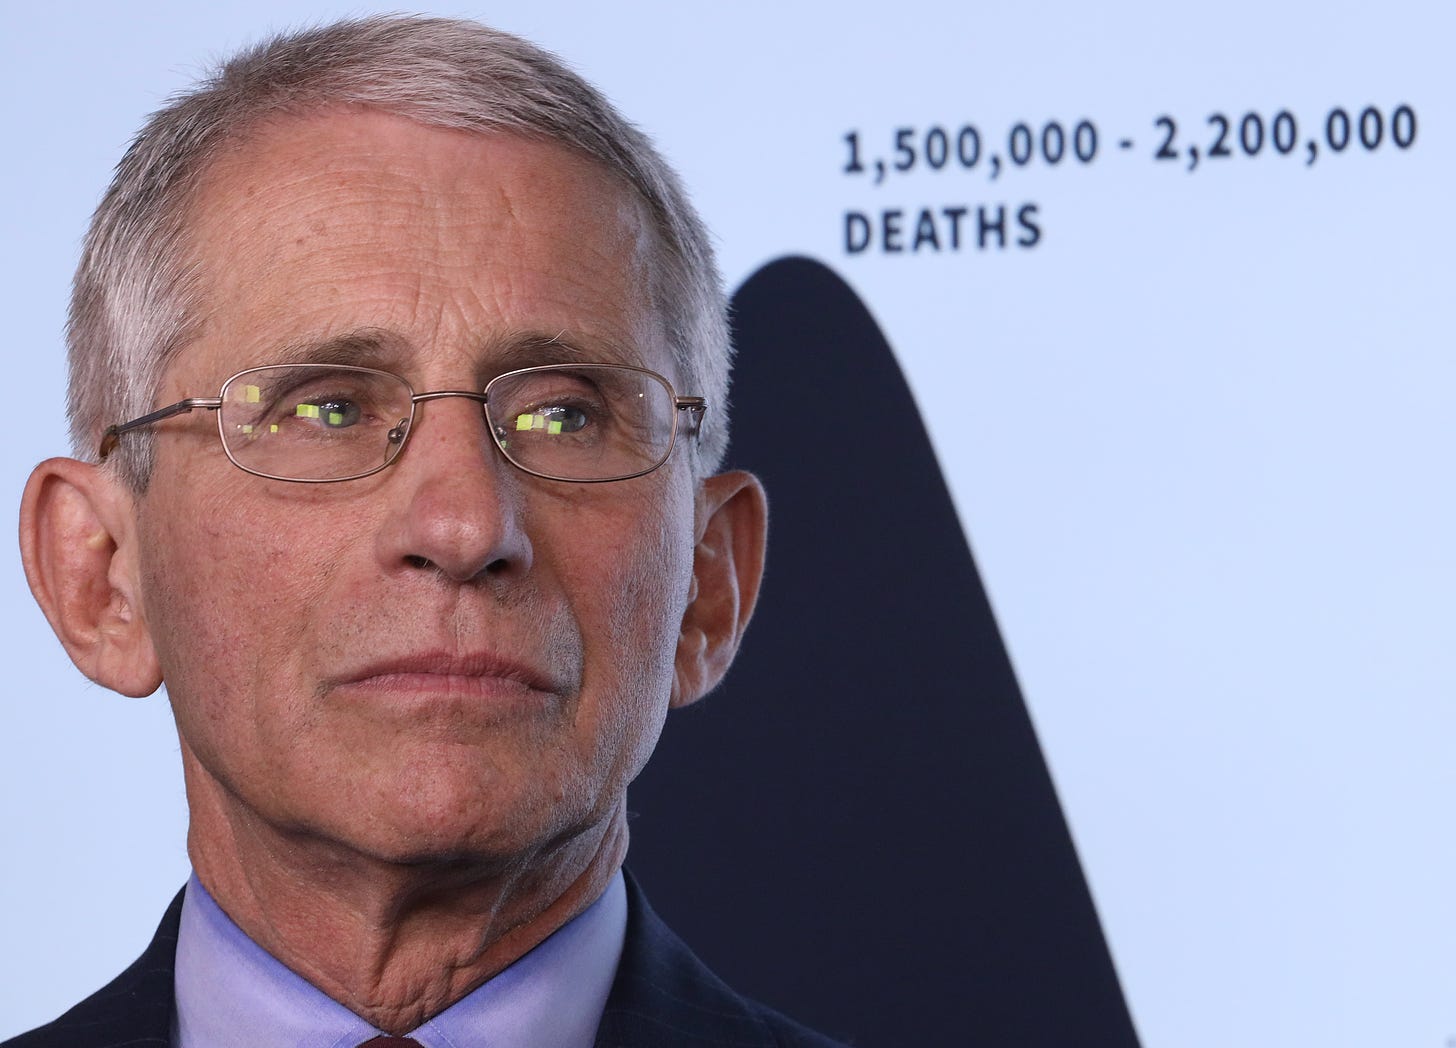 Dr. Fauci frustrated Americans are ignoring science amid coronavirus